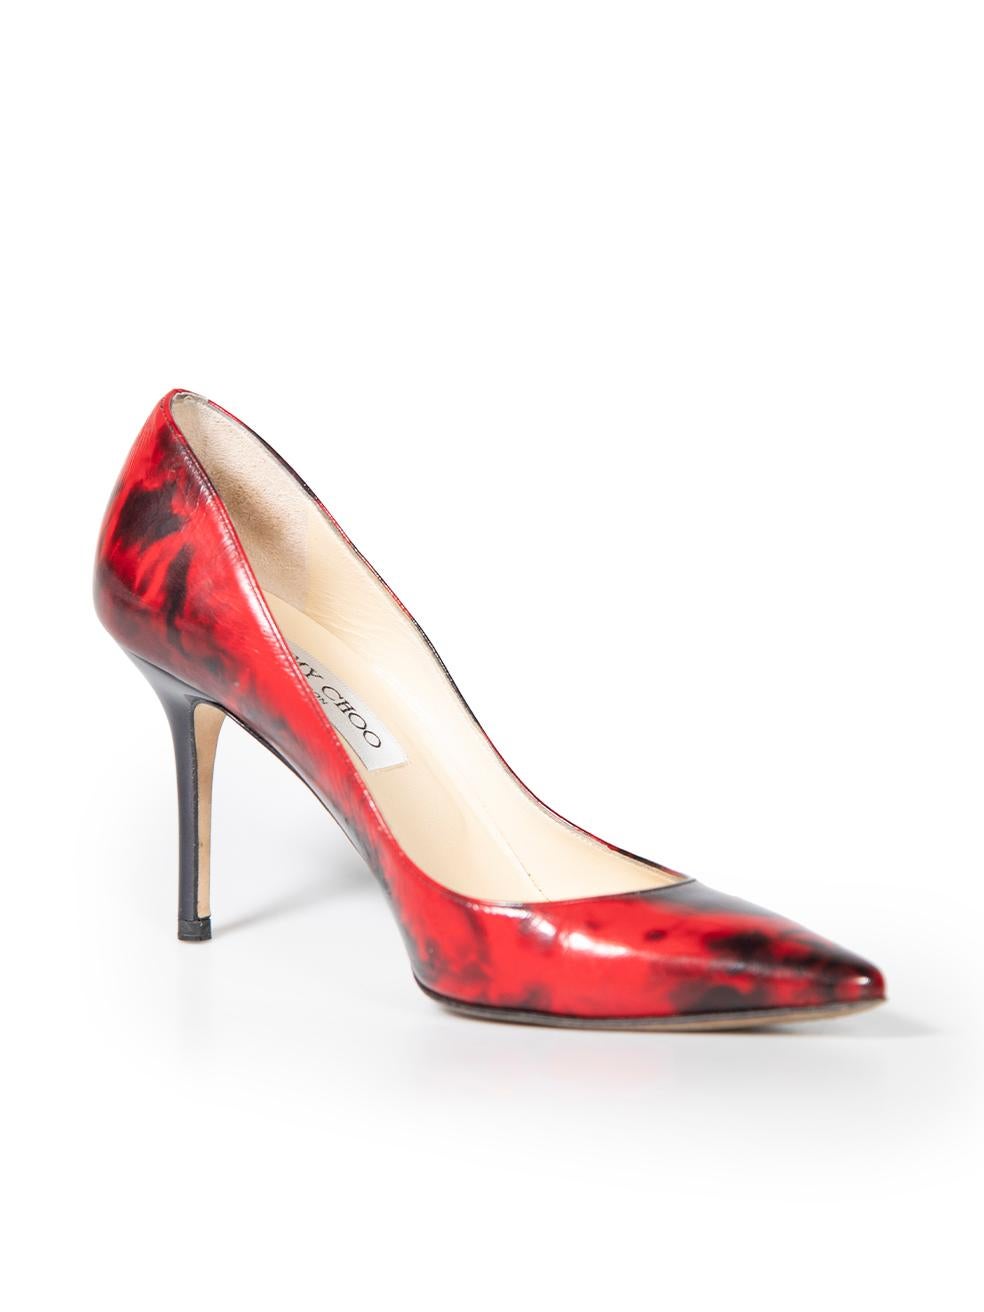 CONDITION is Good. Minor wear to heels is evident. Light creasing to overall leather and minor abrasions to back of heels on this used Jimmy Choo designer resale item. These shoes come with dust bag.
 
 
 
 Details
 
 
 Red
 
 Leather
 
 Slip on